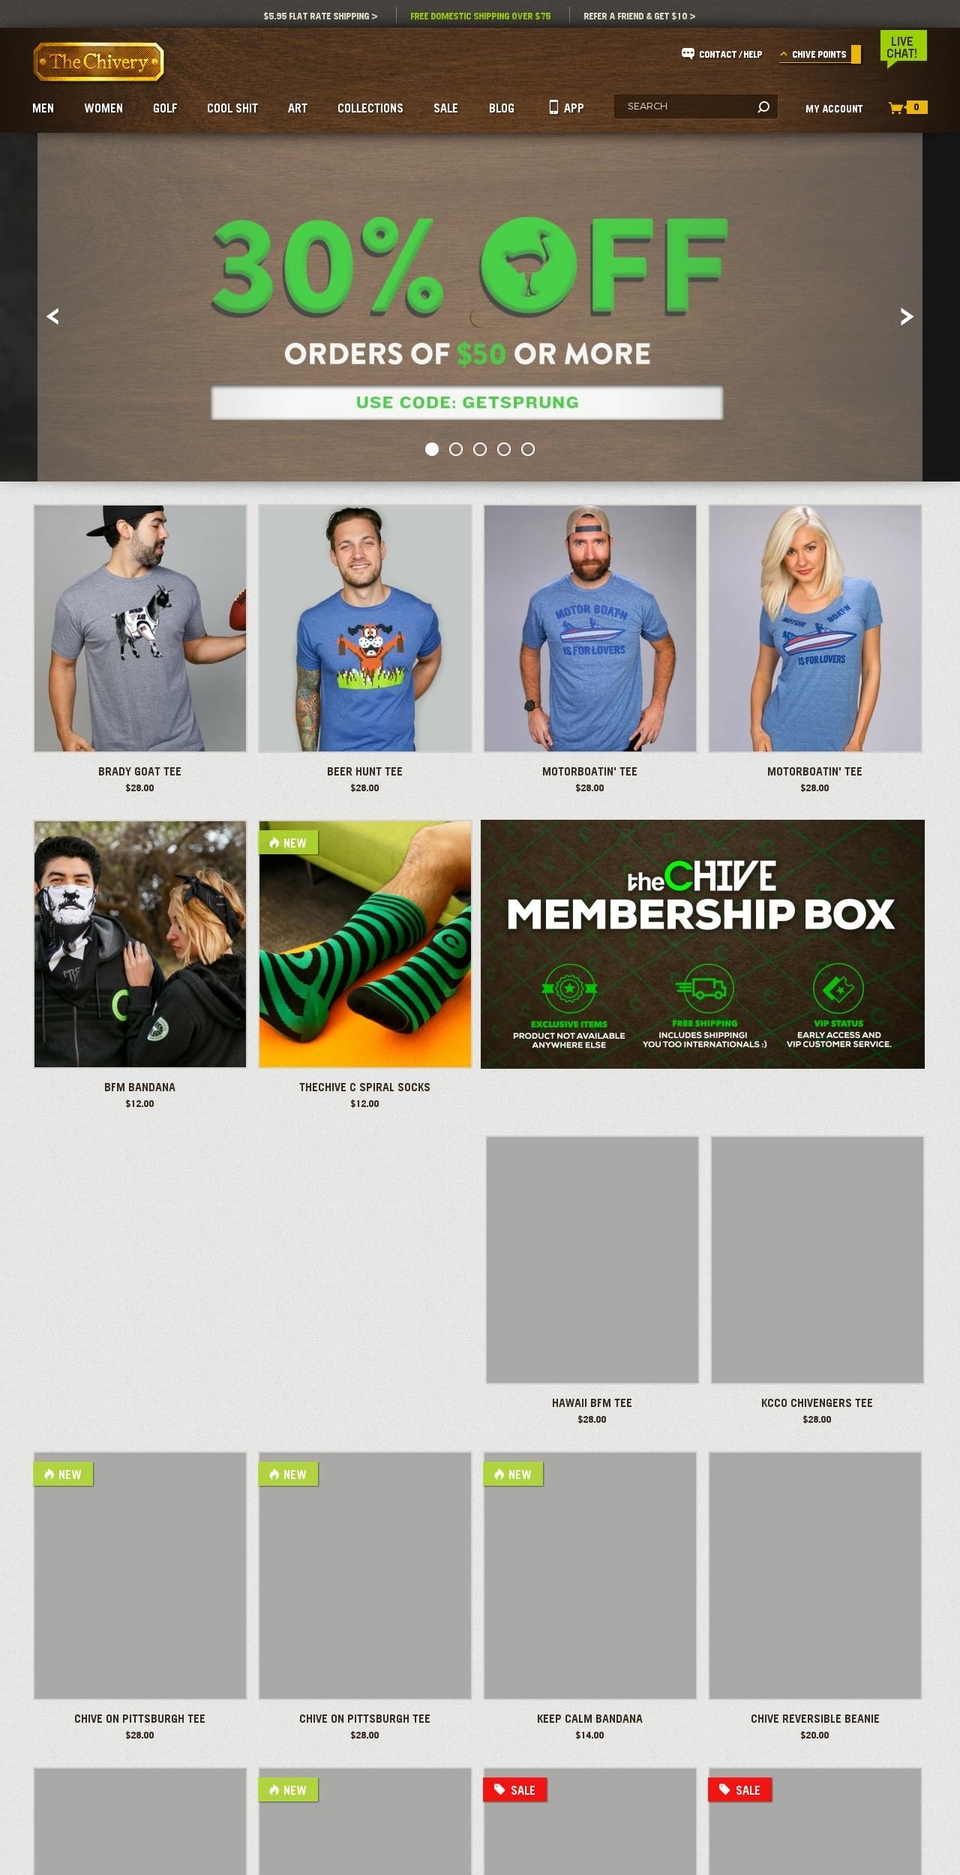 Prestige Shopify theme site example thechivery.myshopify.com